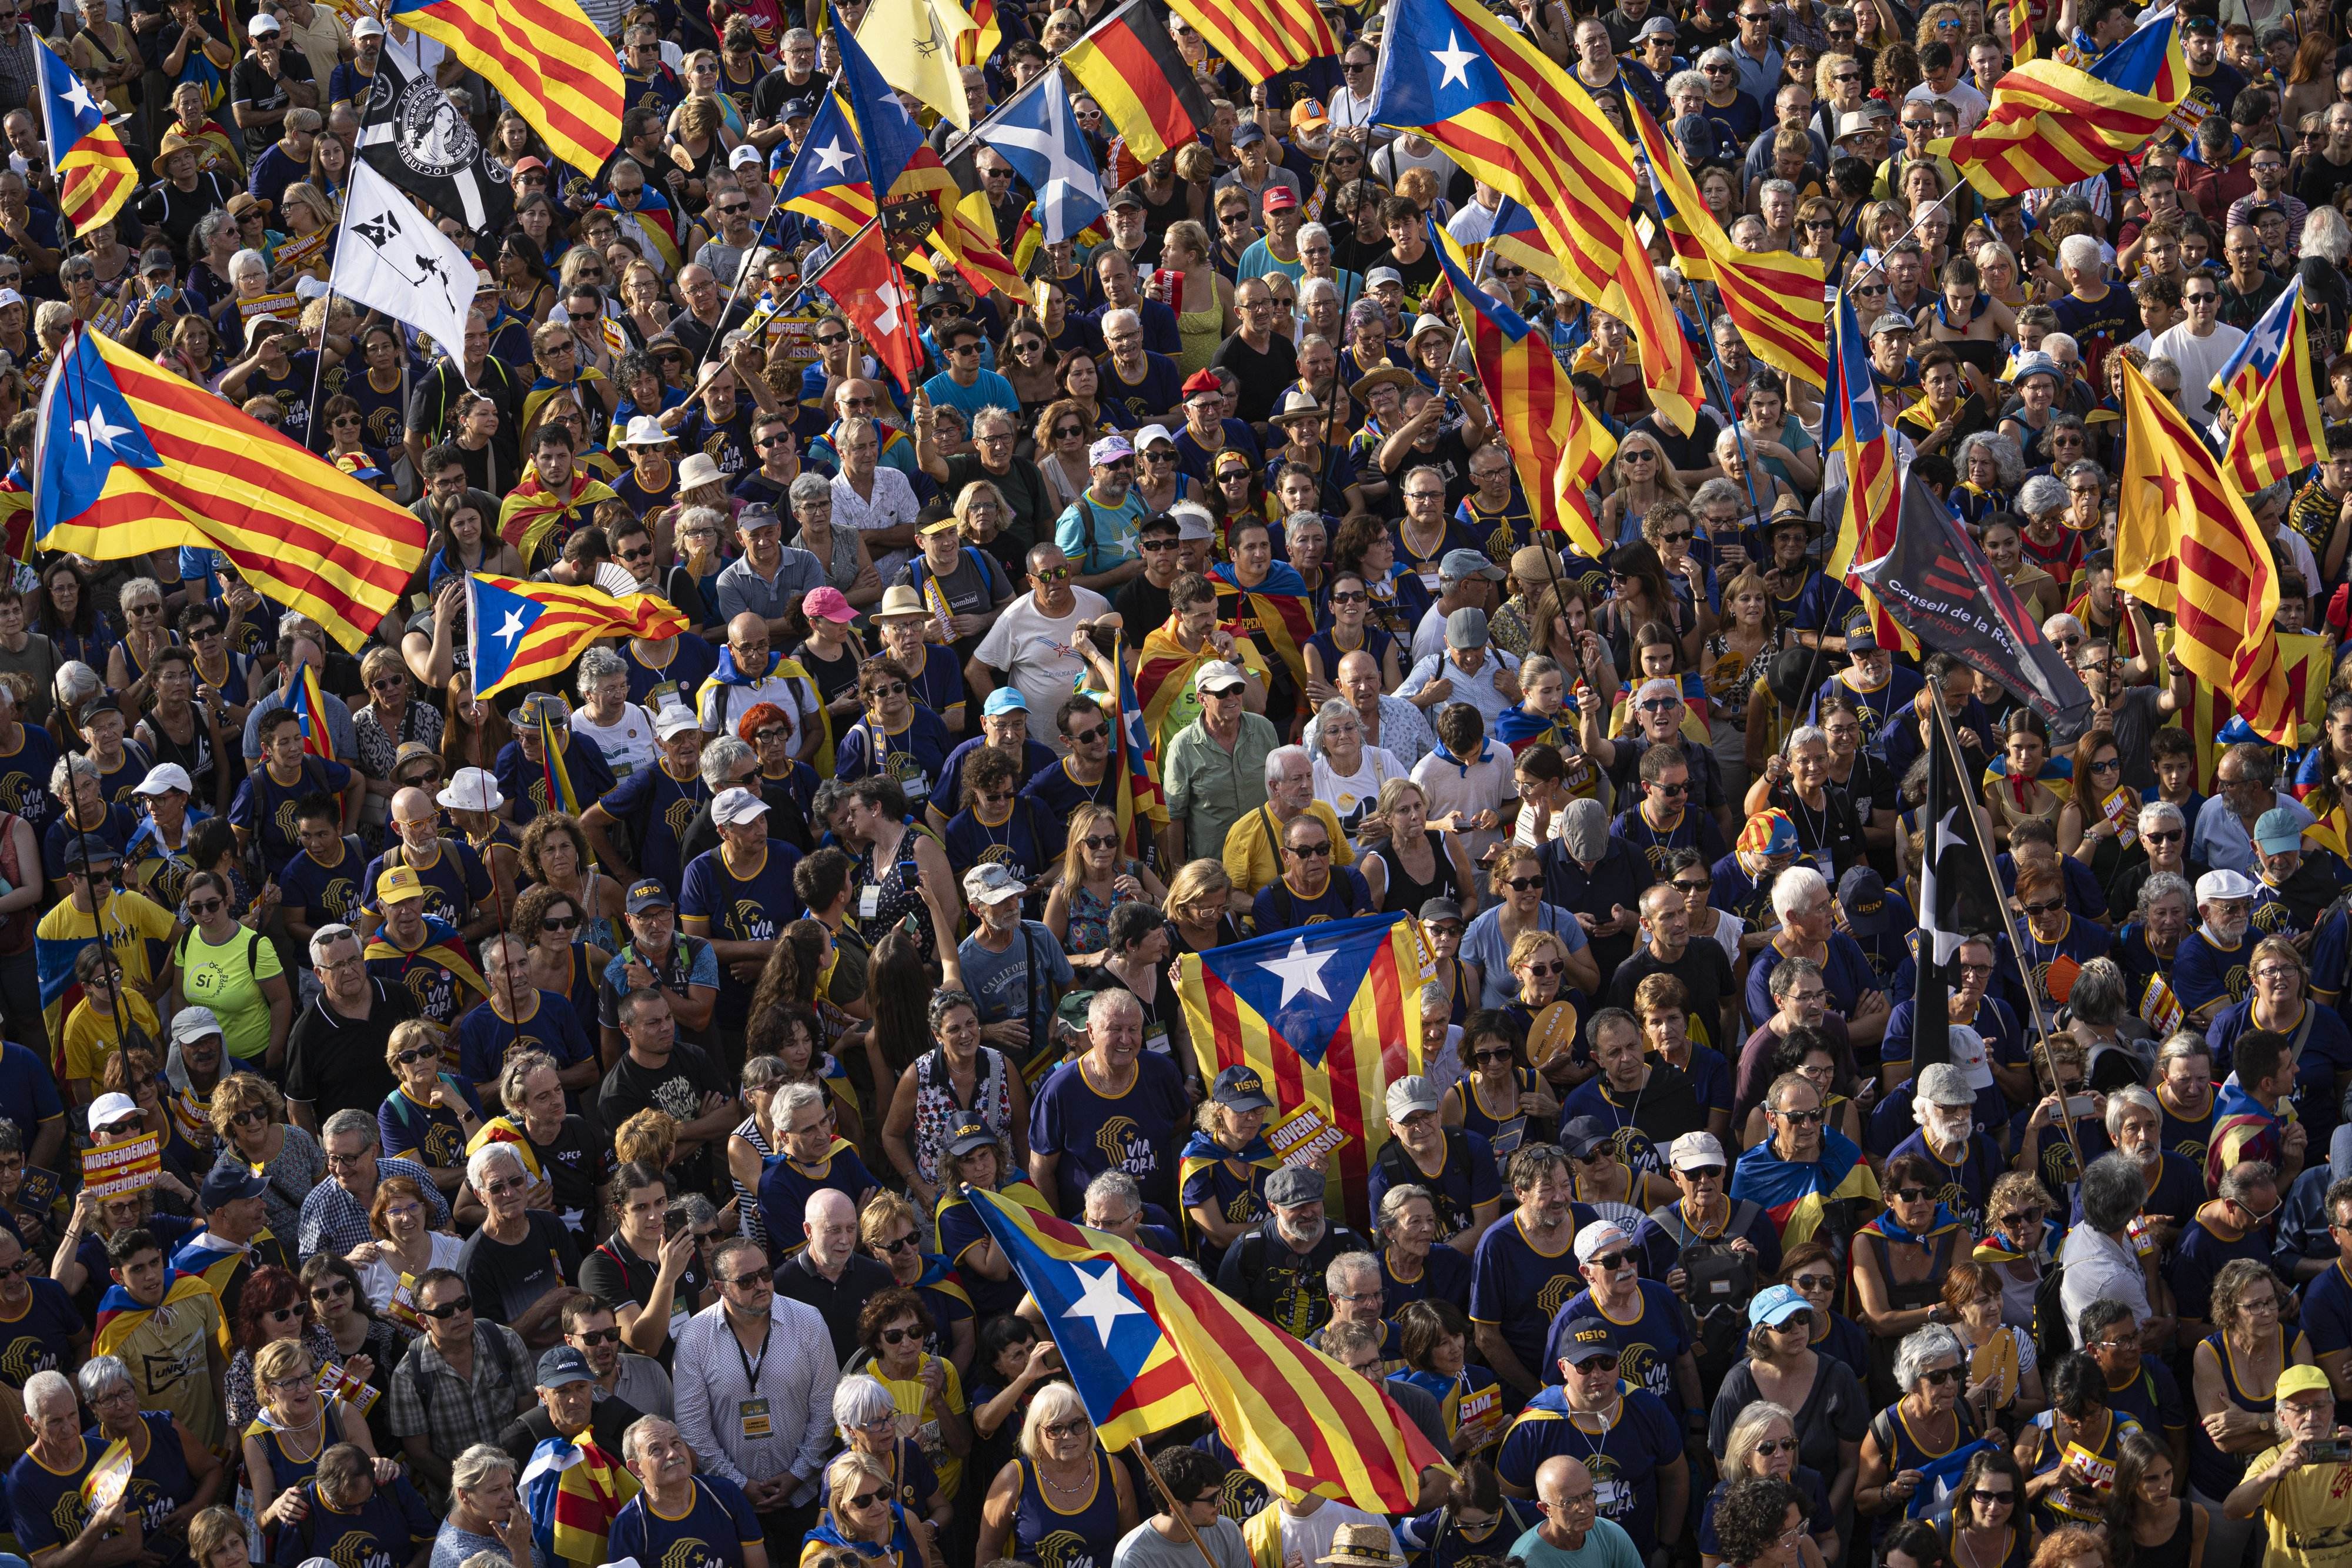 Spain asks Europol to correct report wrongly linking Catalan independence movement to terrorism